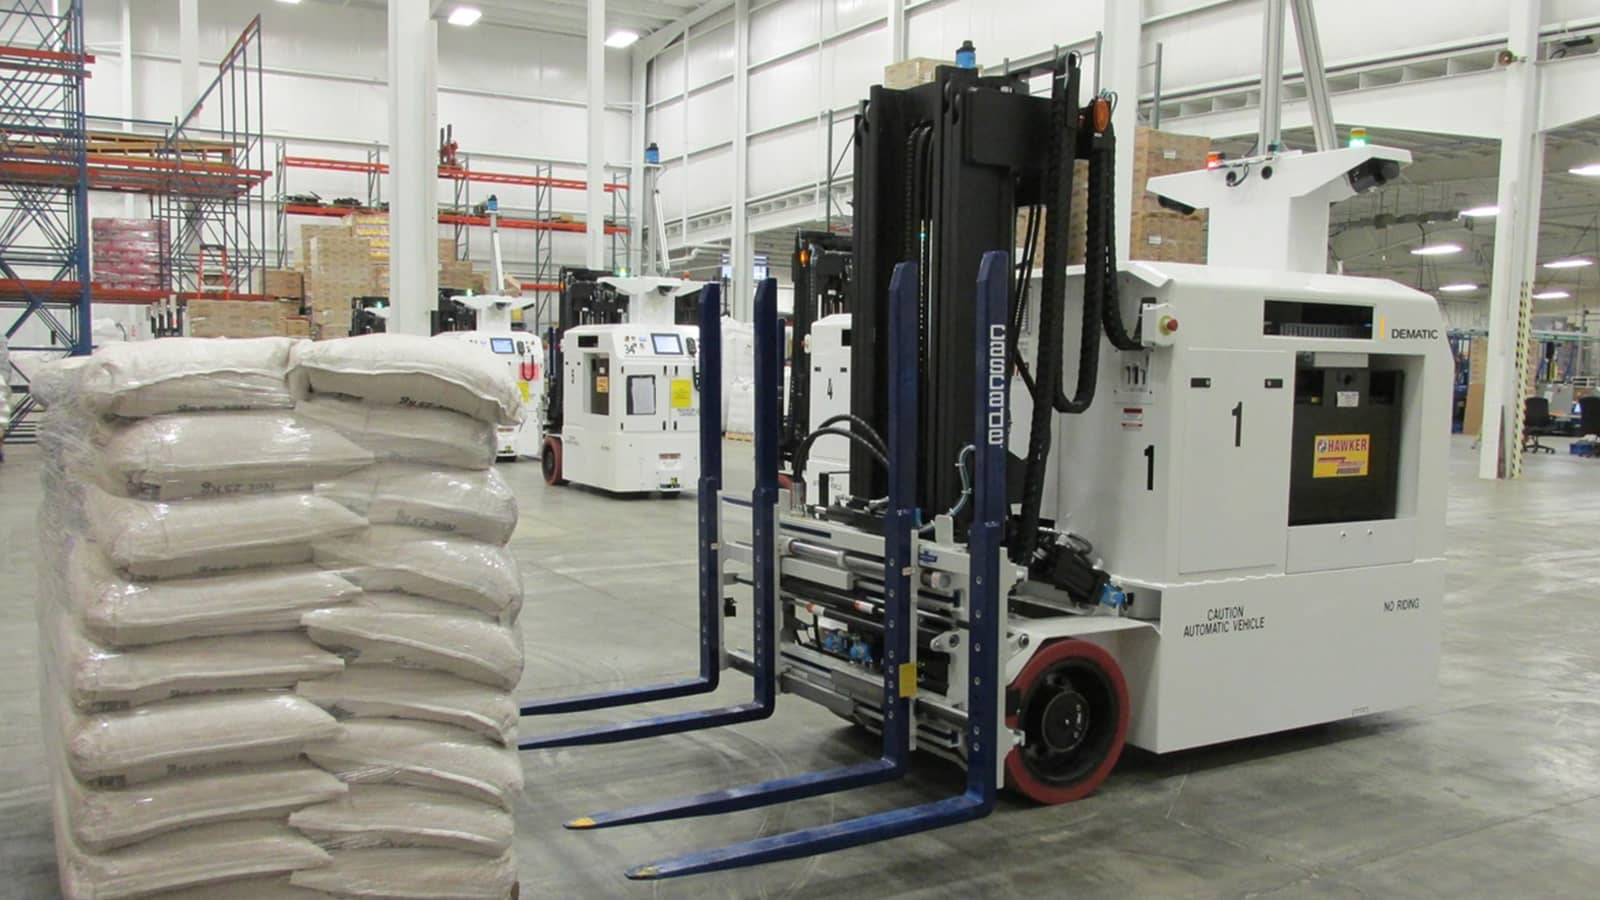 Dematic AGV shown approaching a pallet of product in an automated warehouse